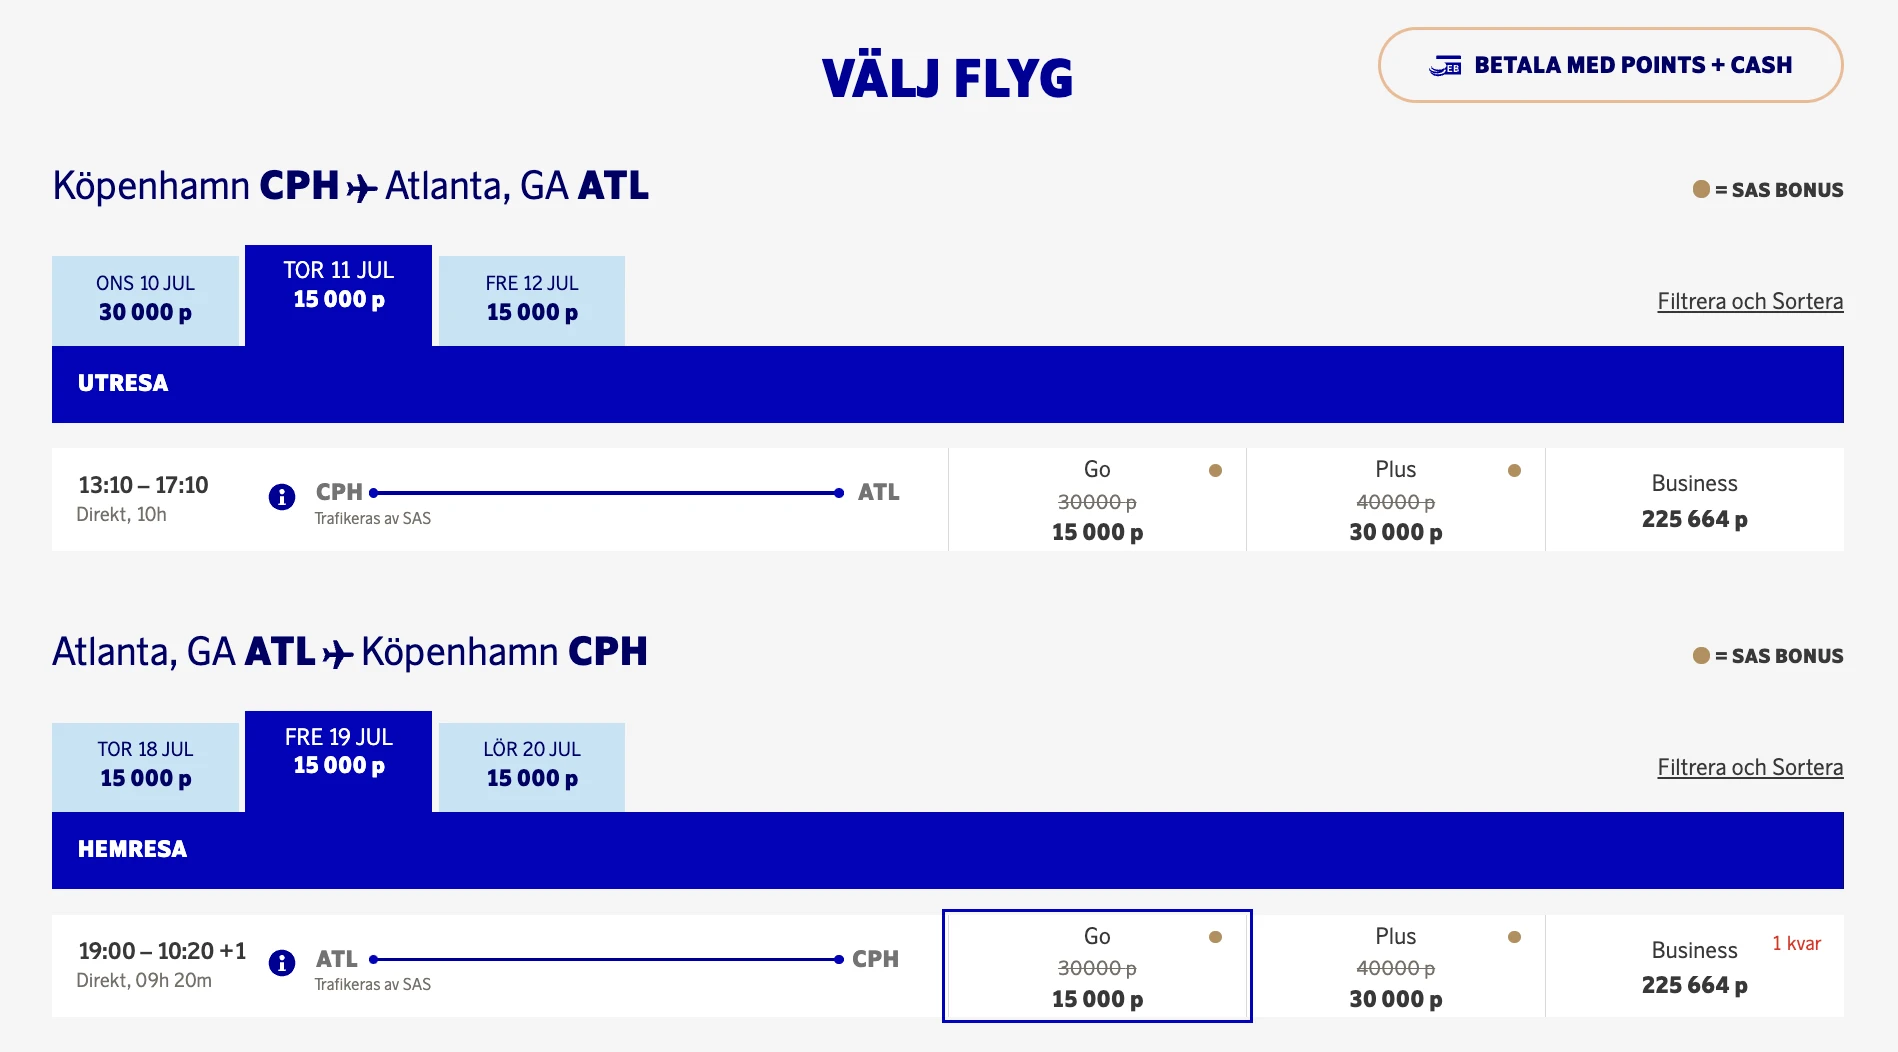 SAS is offering 50% point discount on flights to Atlanta with EuroBonus points.